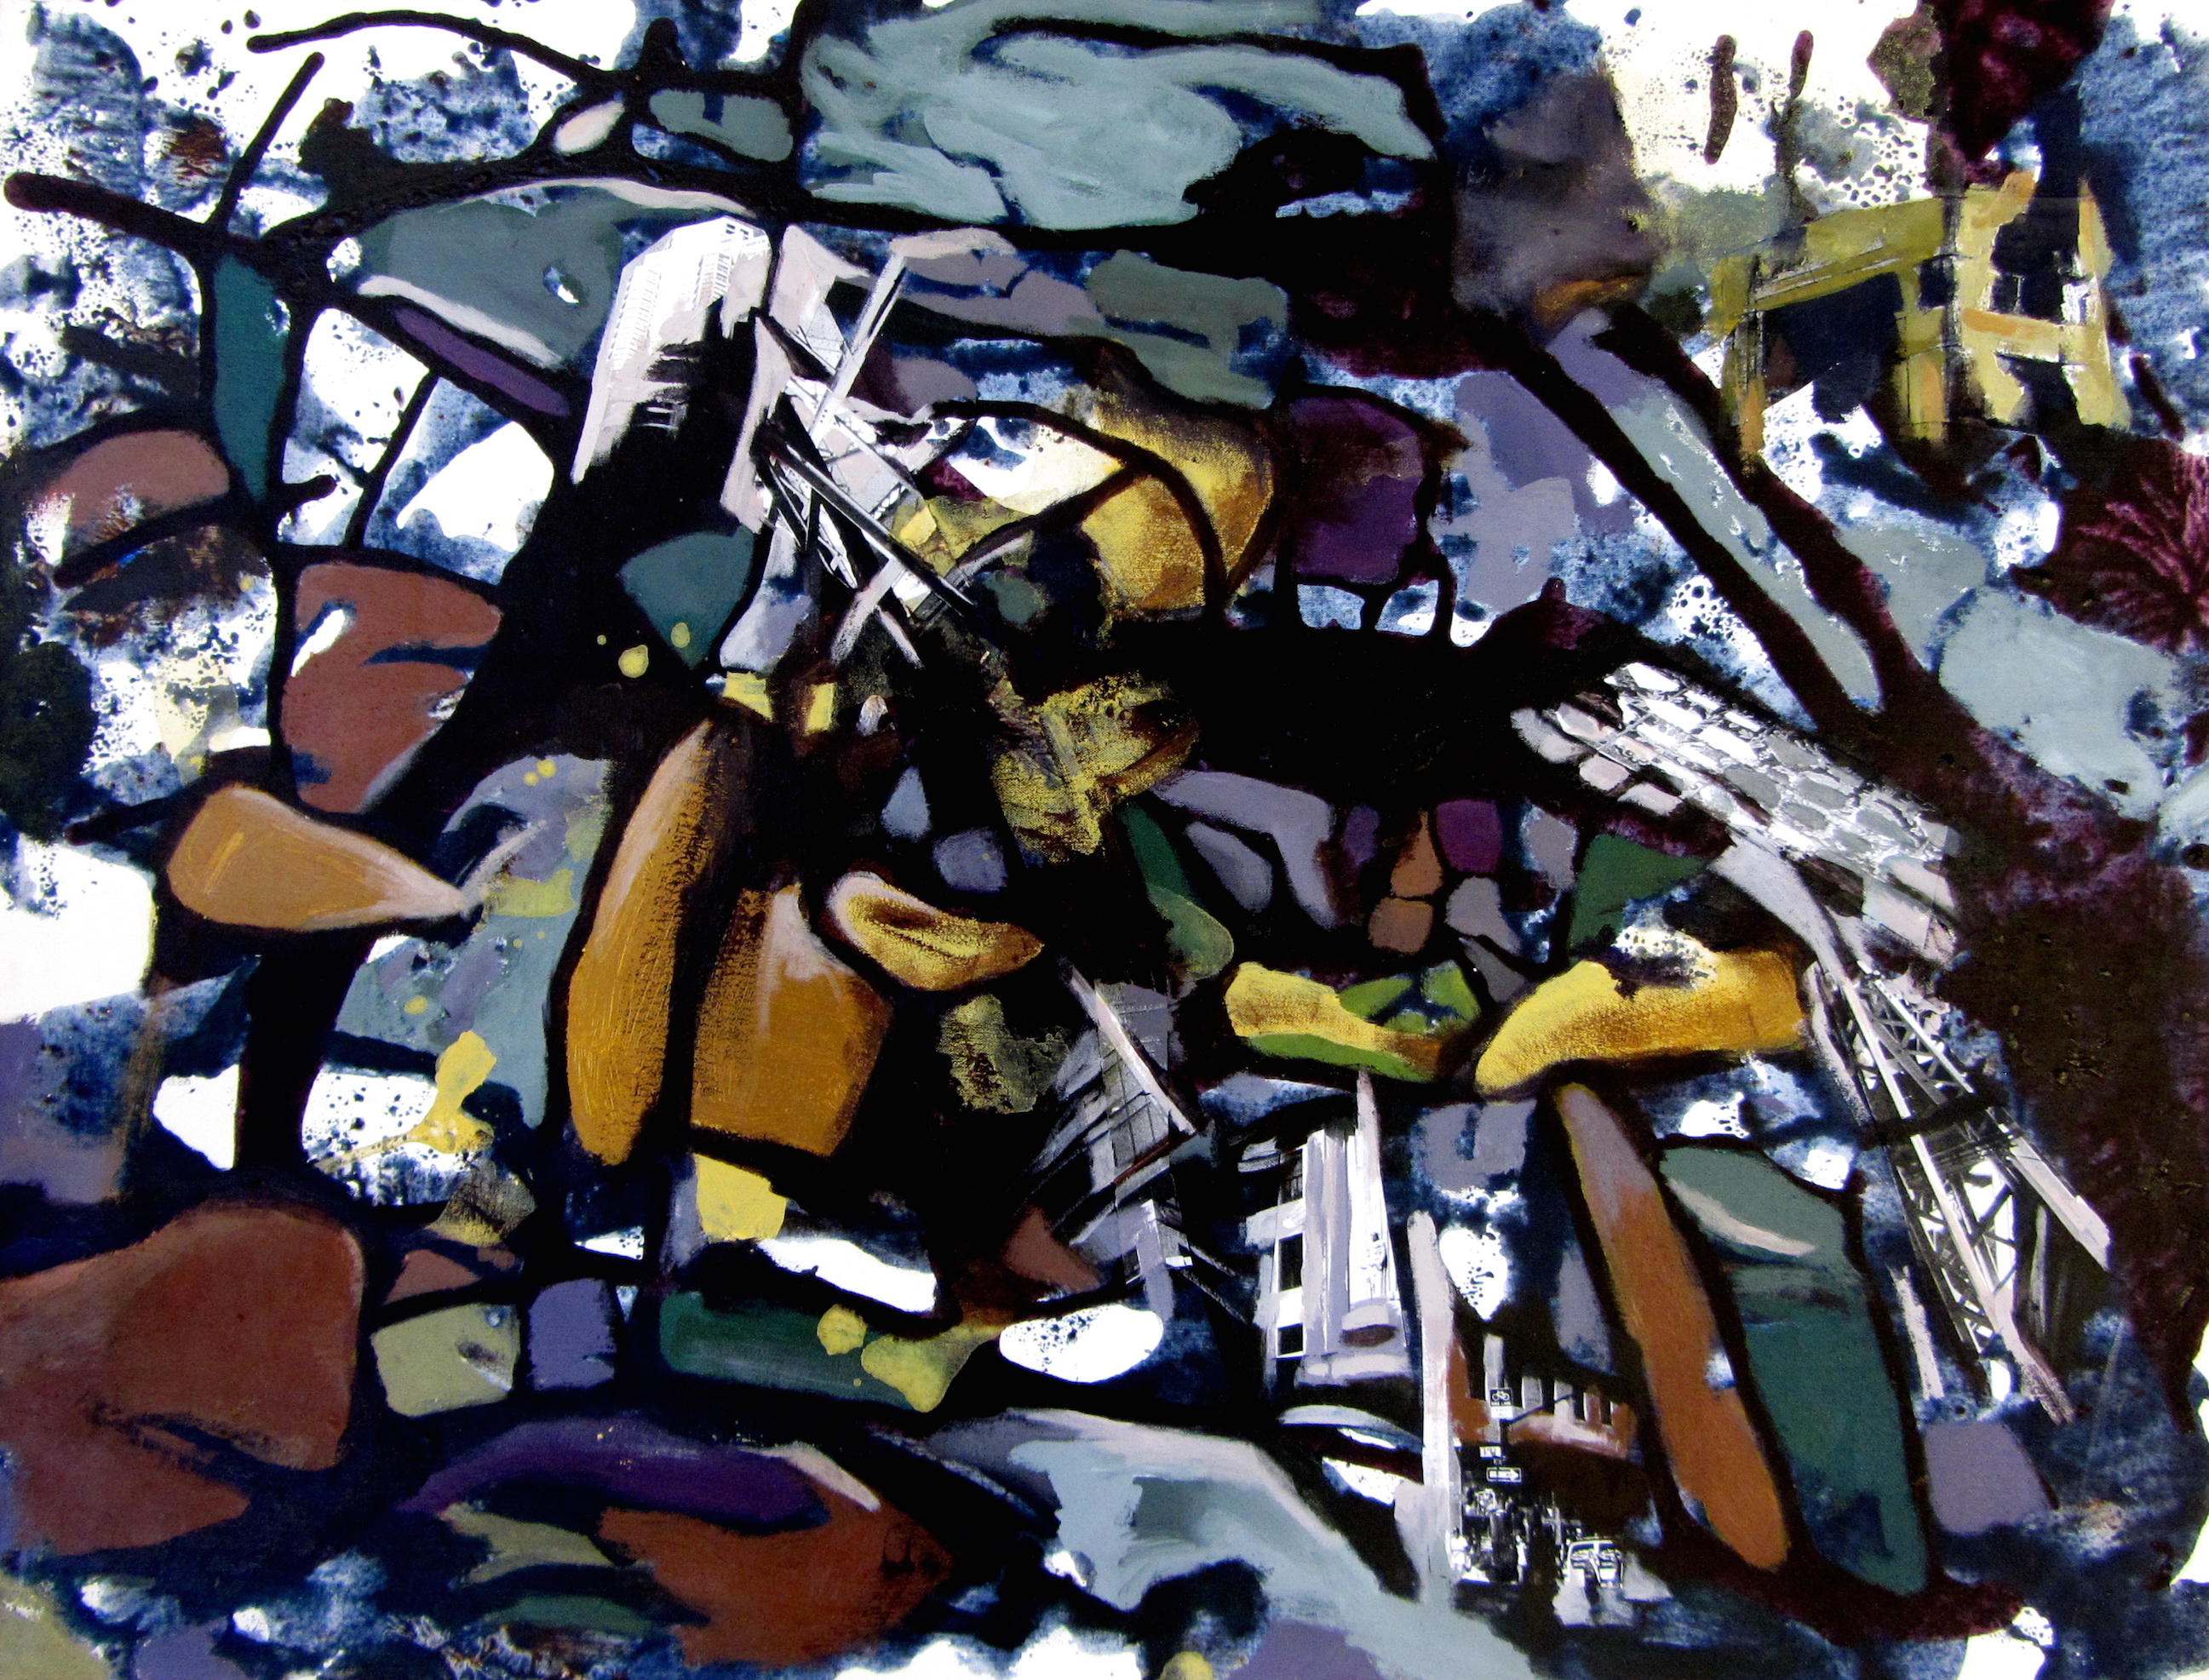 Rubble, mixed media on canvas, 18x23 inches, 2011